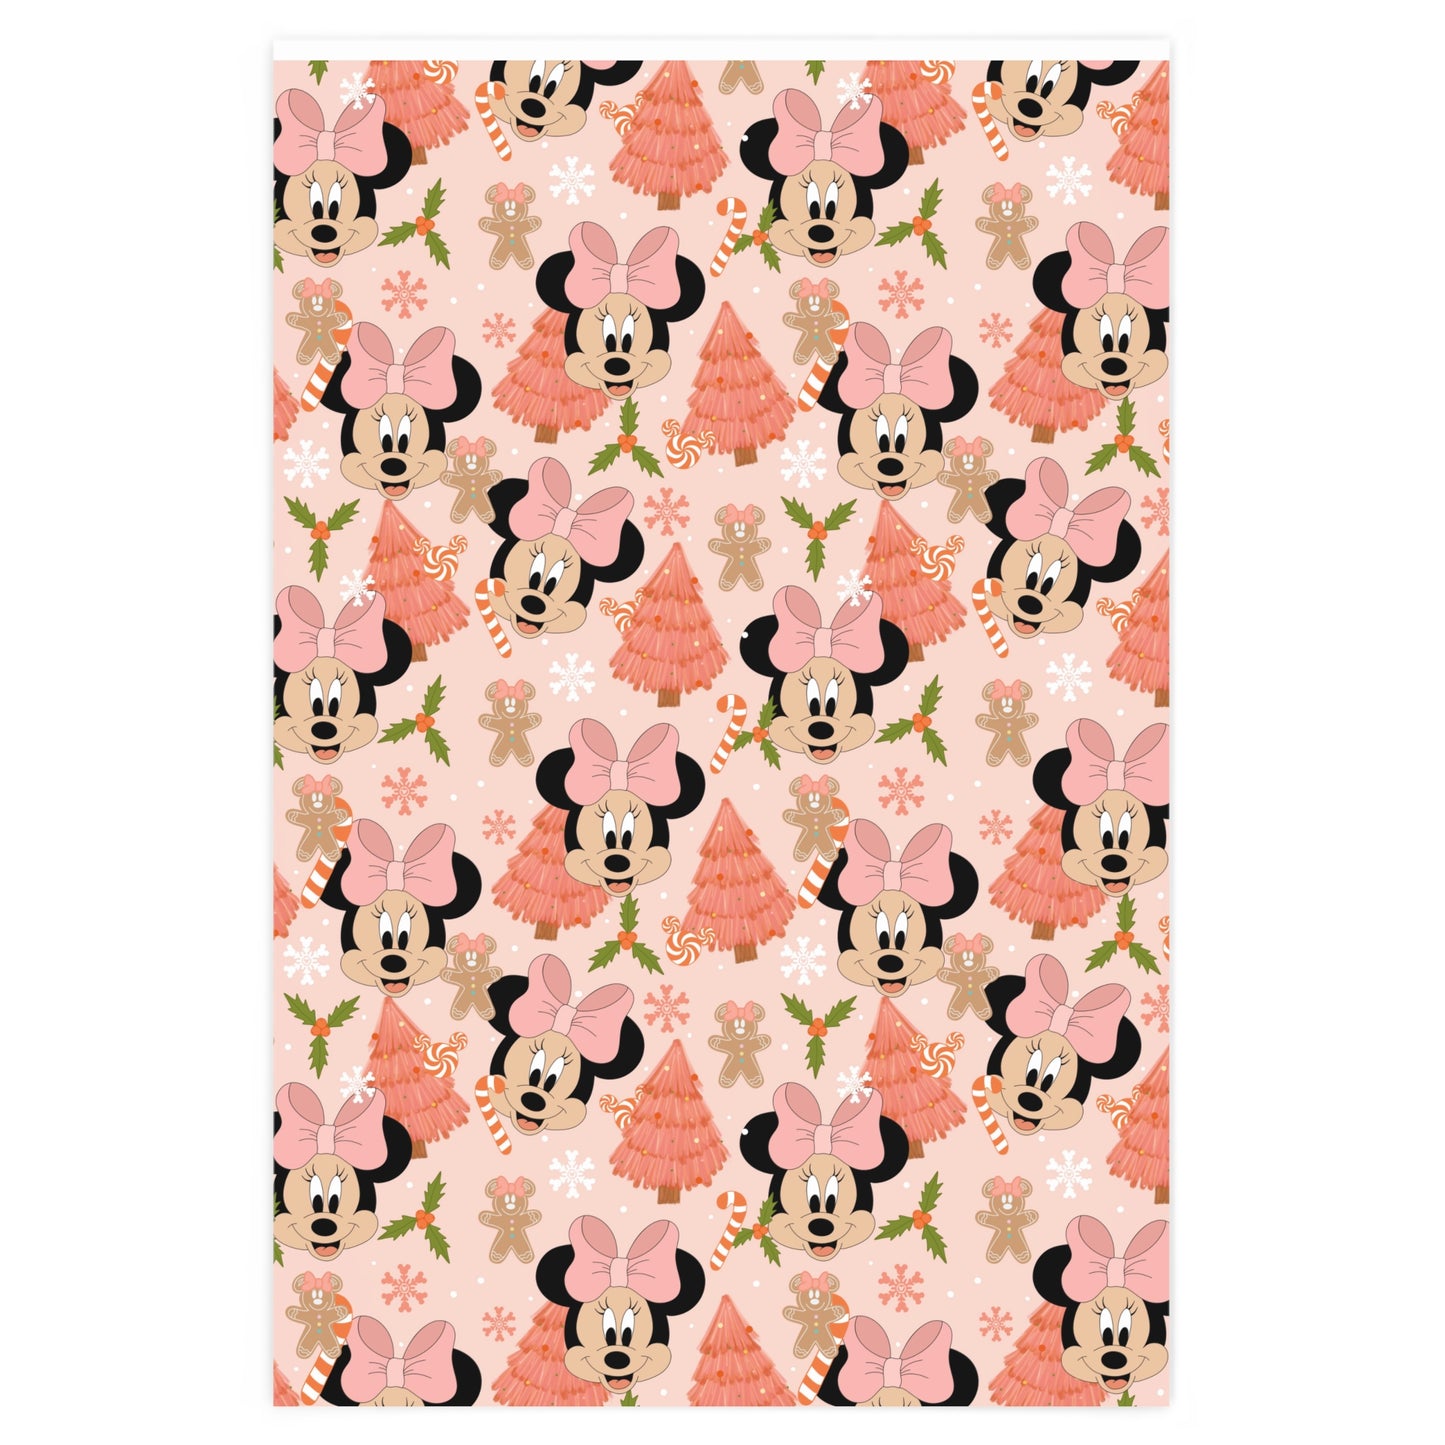 Merry Minnie Christmas Wrapping Paper